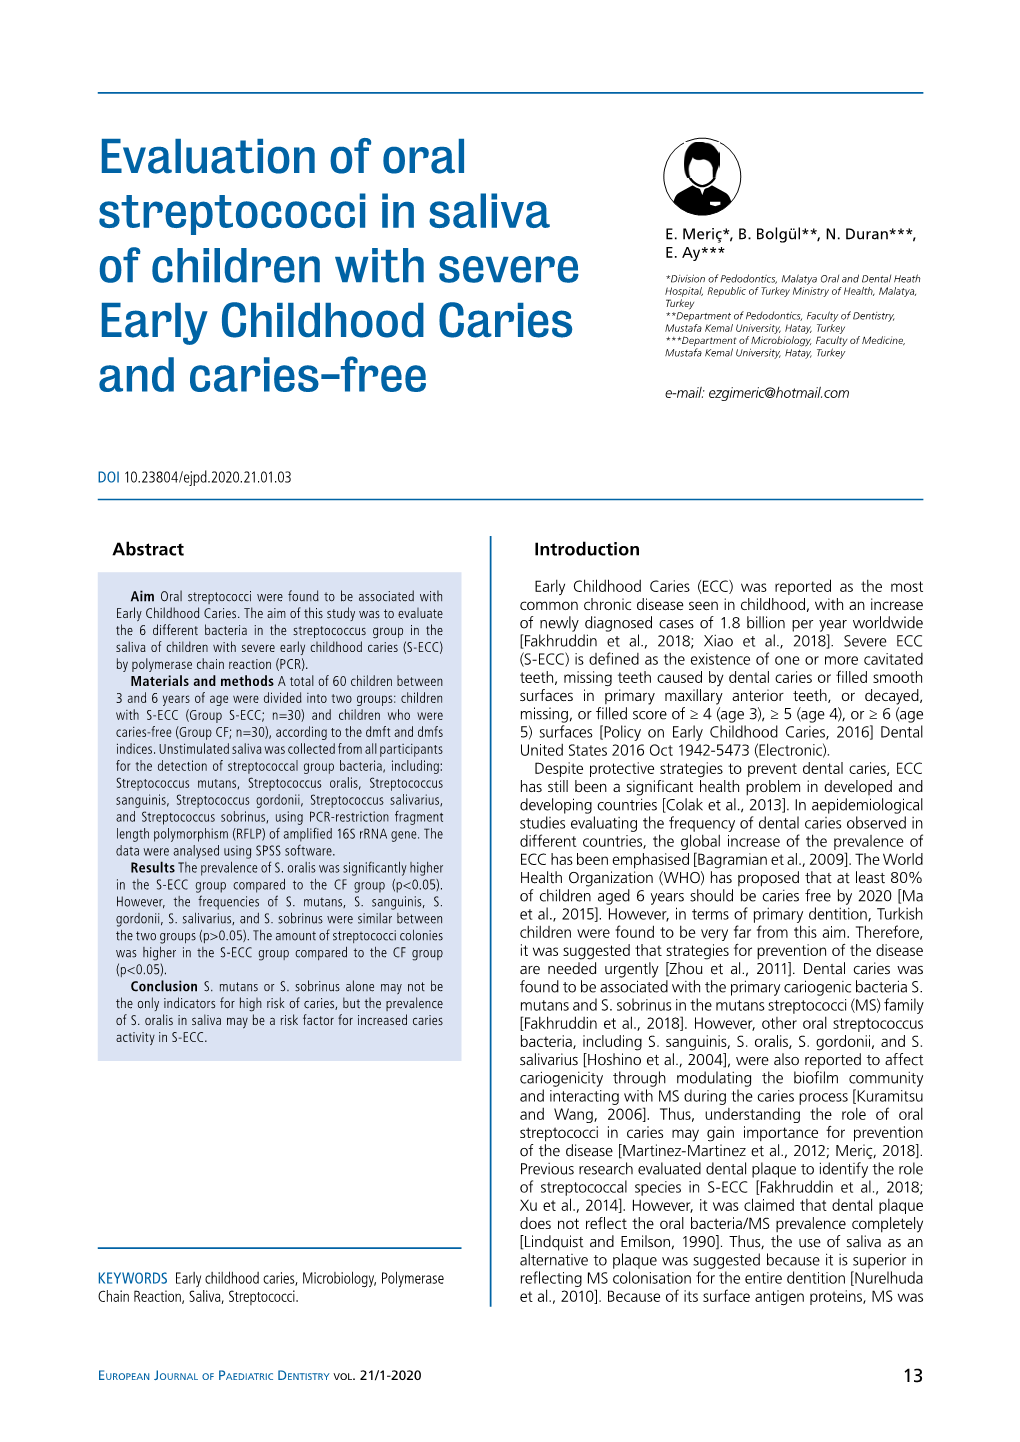 Evaluation of Oral Streptococci in Saliva of Children with Severe Early Childhood Caries and Caries-Free